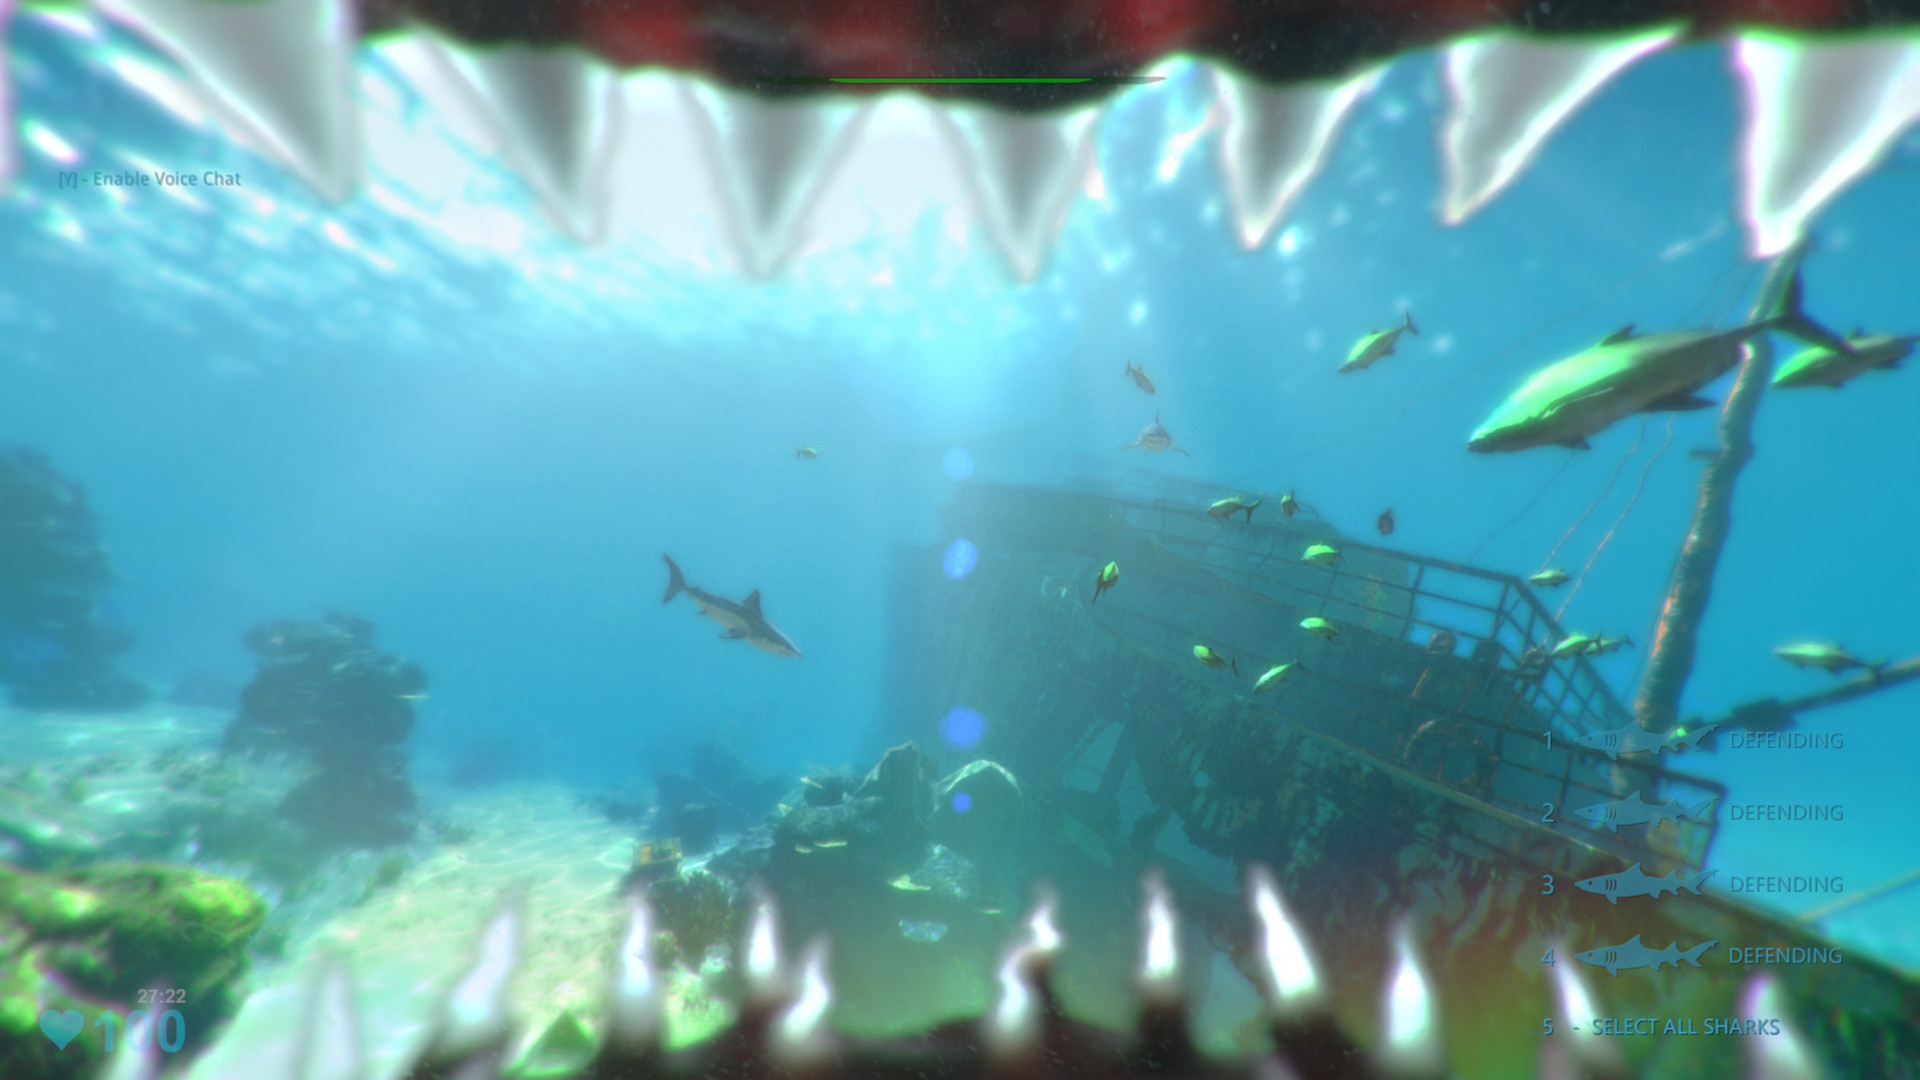 What's On Steam - Double Head Shark Attack